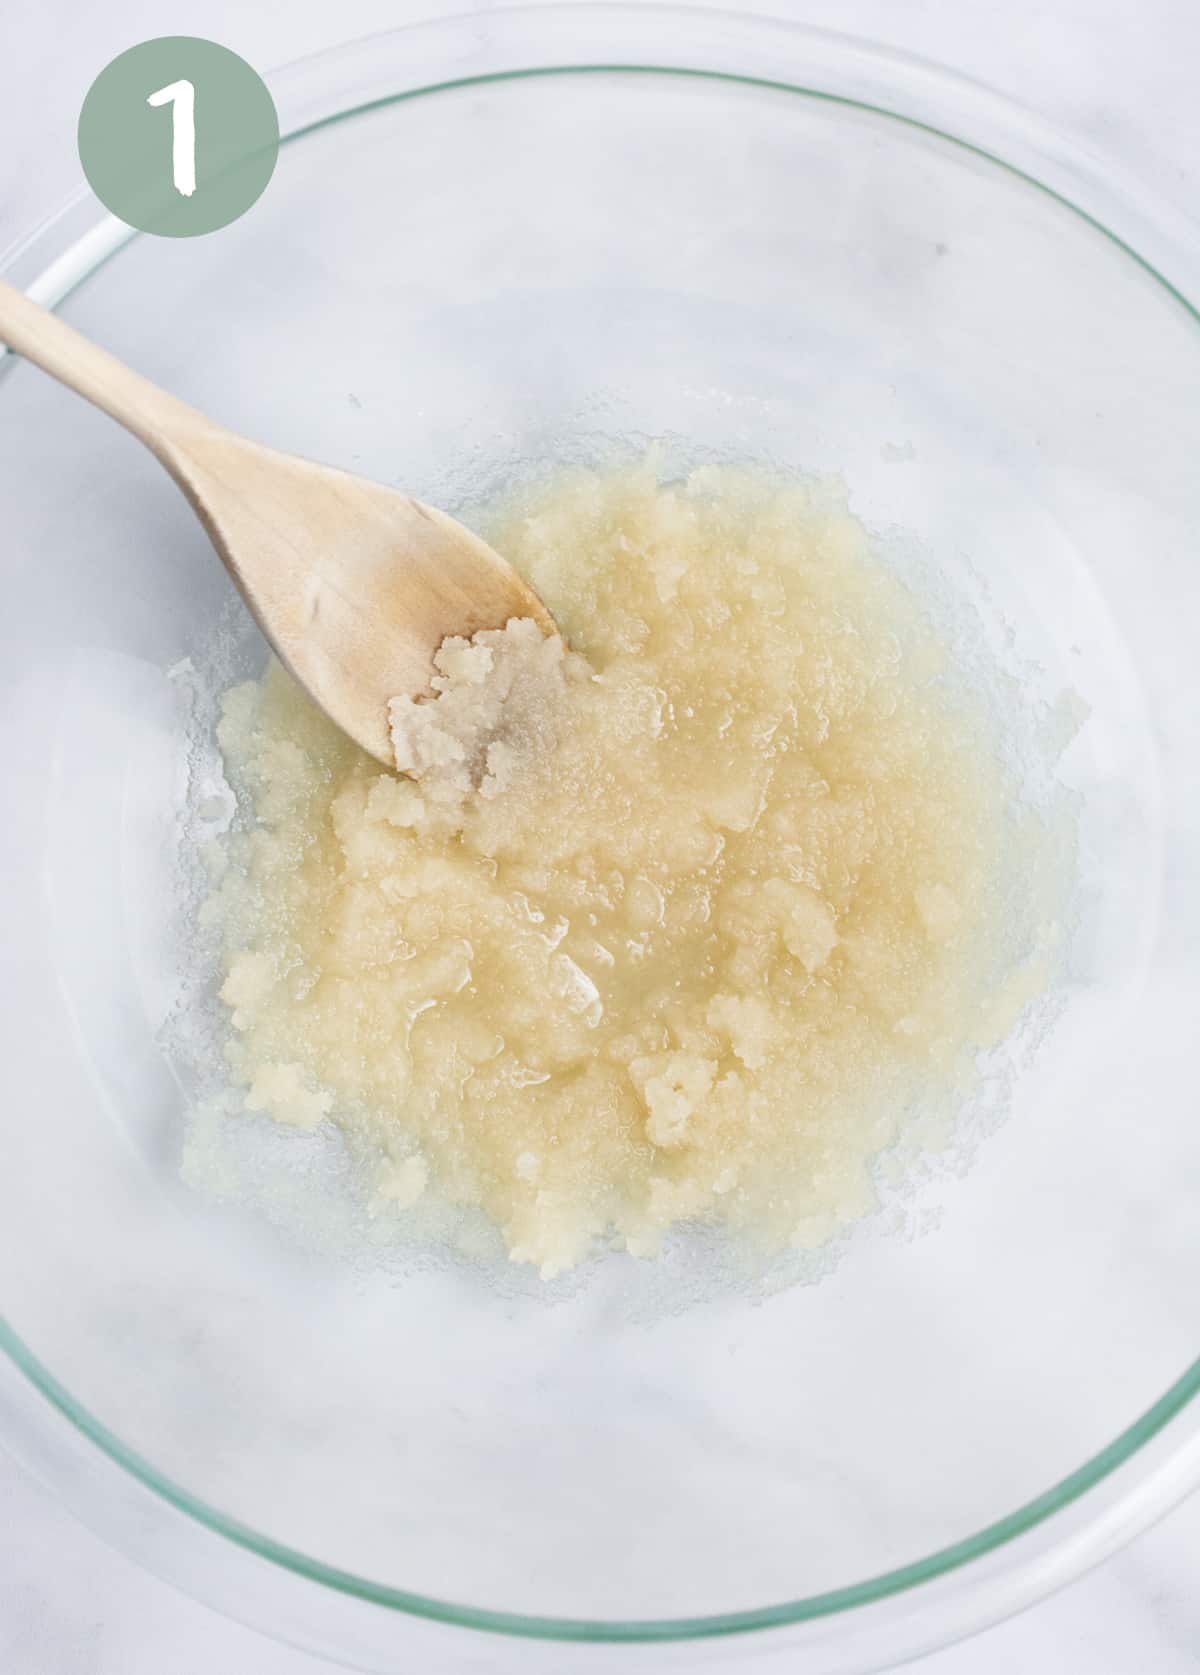 Oil and sugar mixed together with a wooden spoon in a glass bowl.